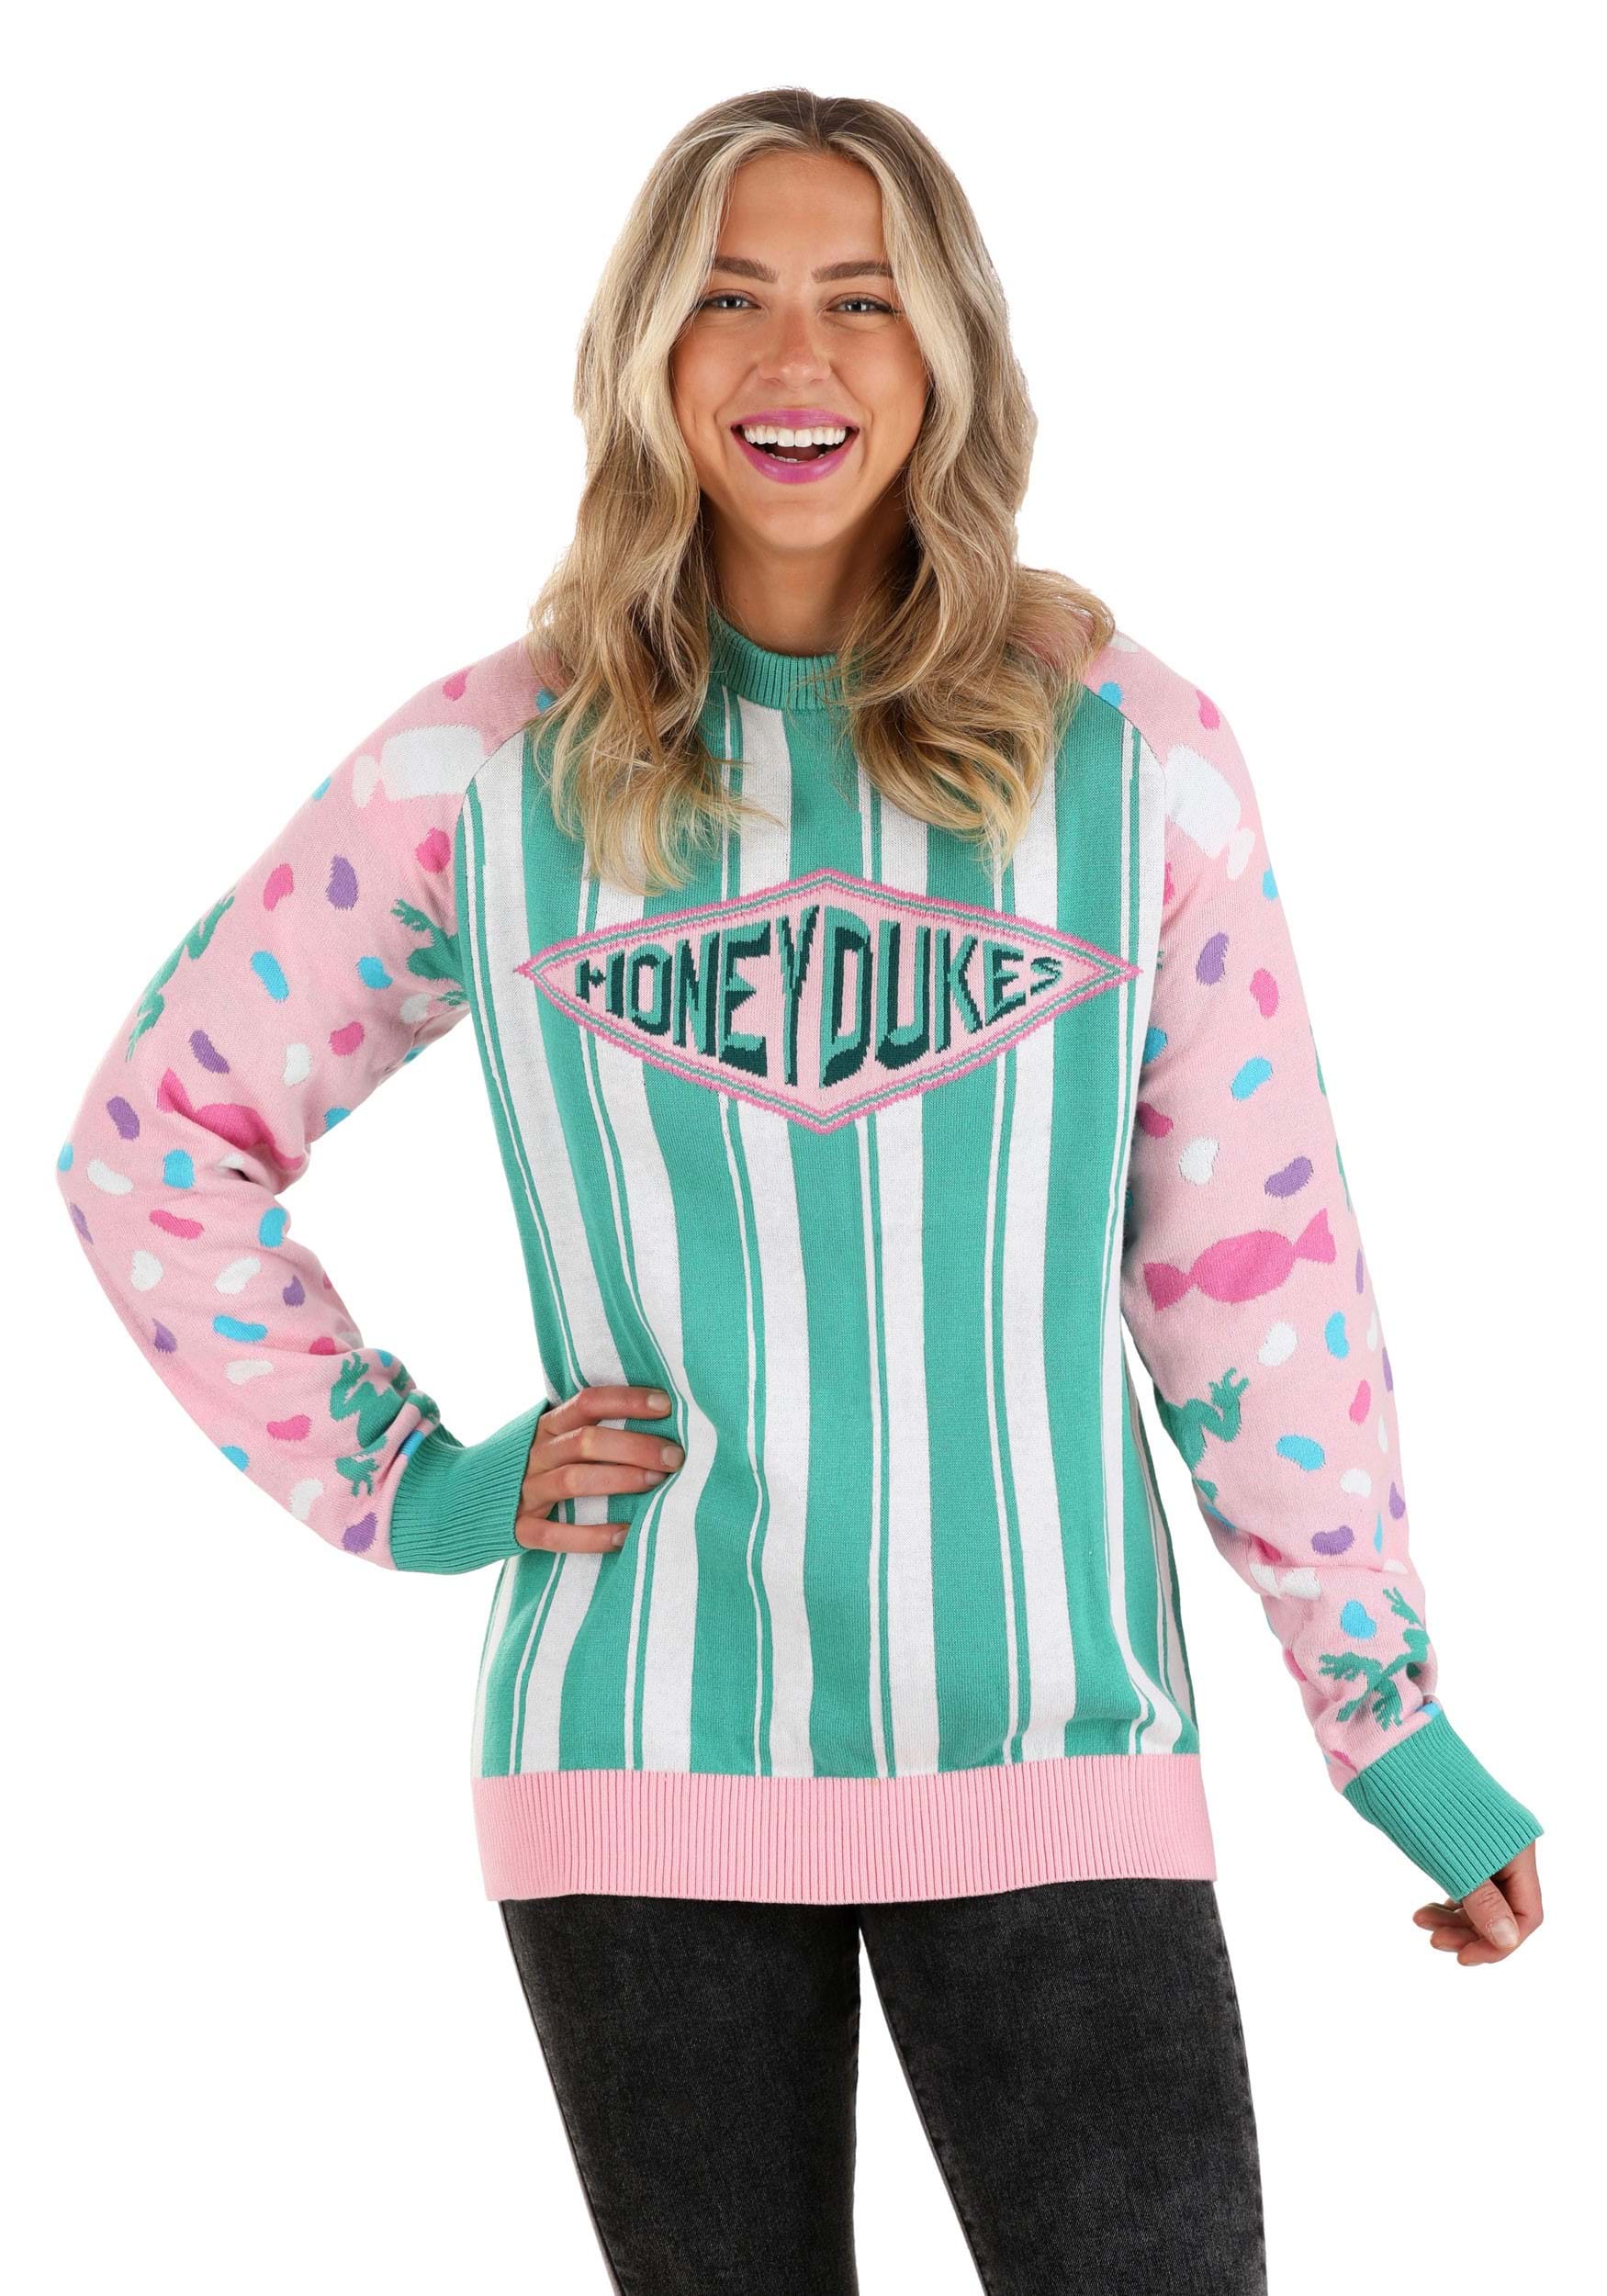 Honeydukes Candy Harry Potter Adult Sweater